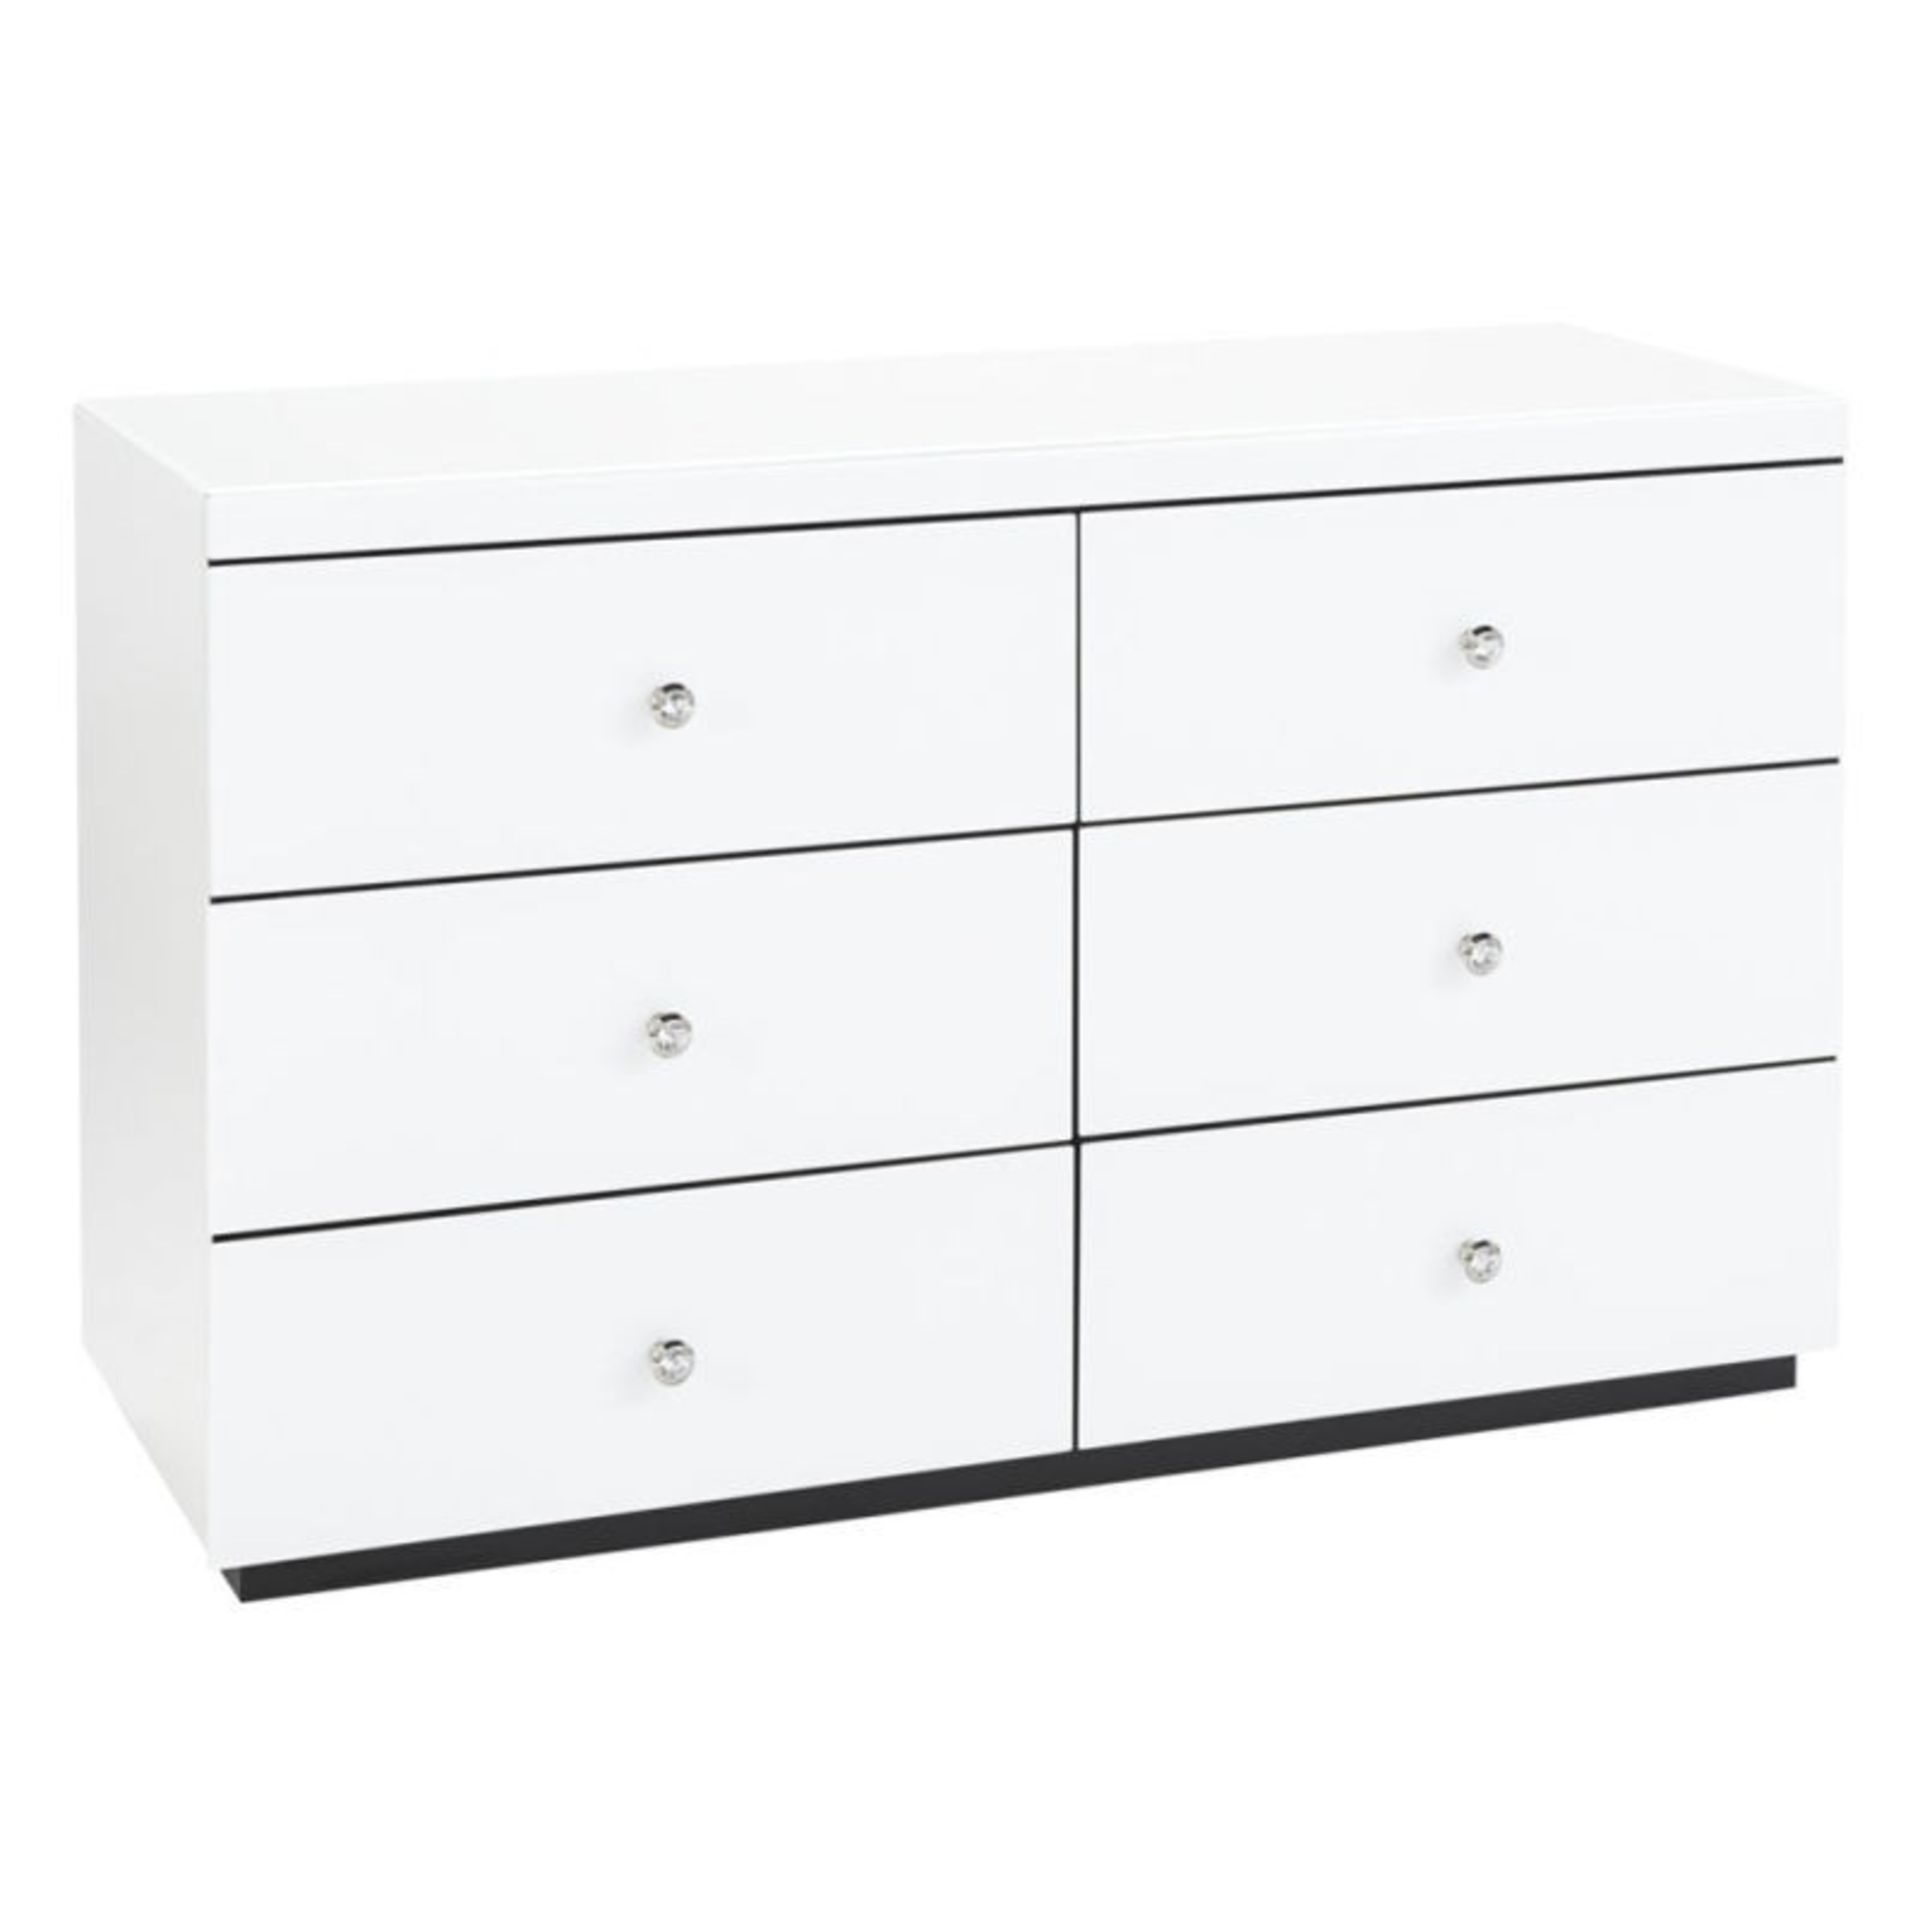 Brand new direct from the manufacturers the shard glass diamond white 3 + 3 drawer chest, made